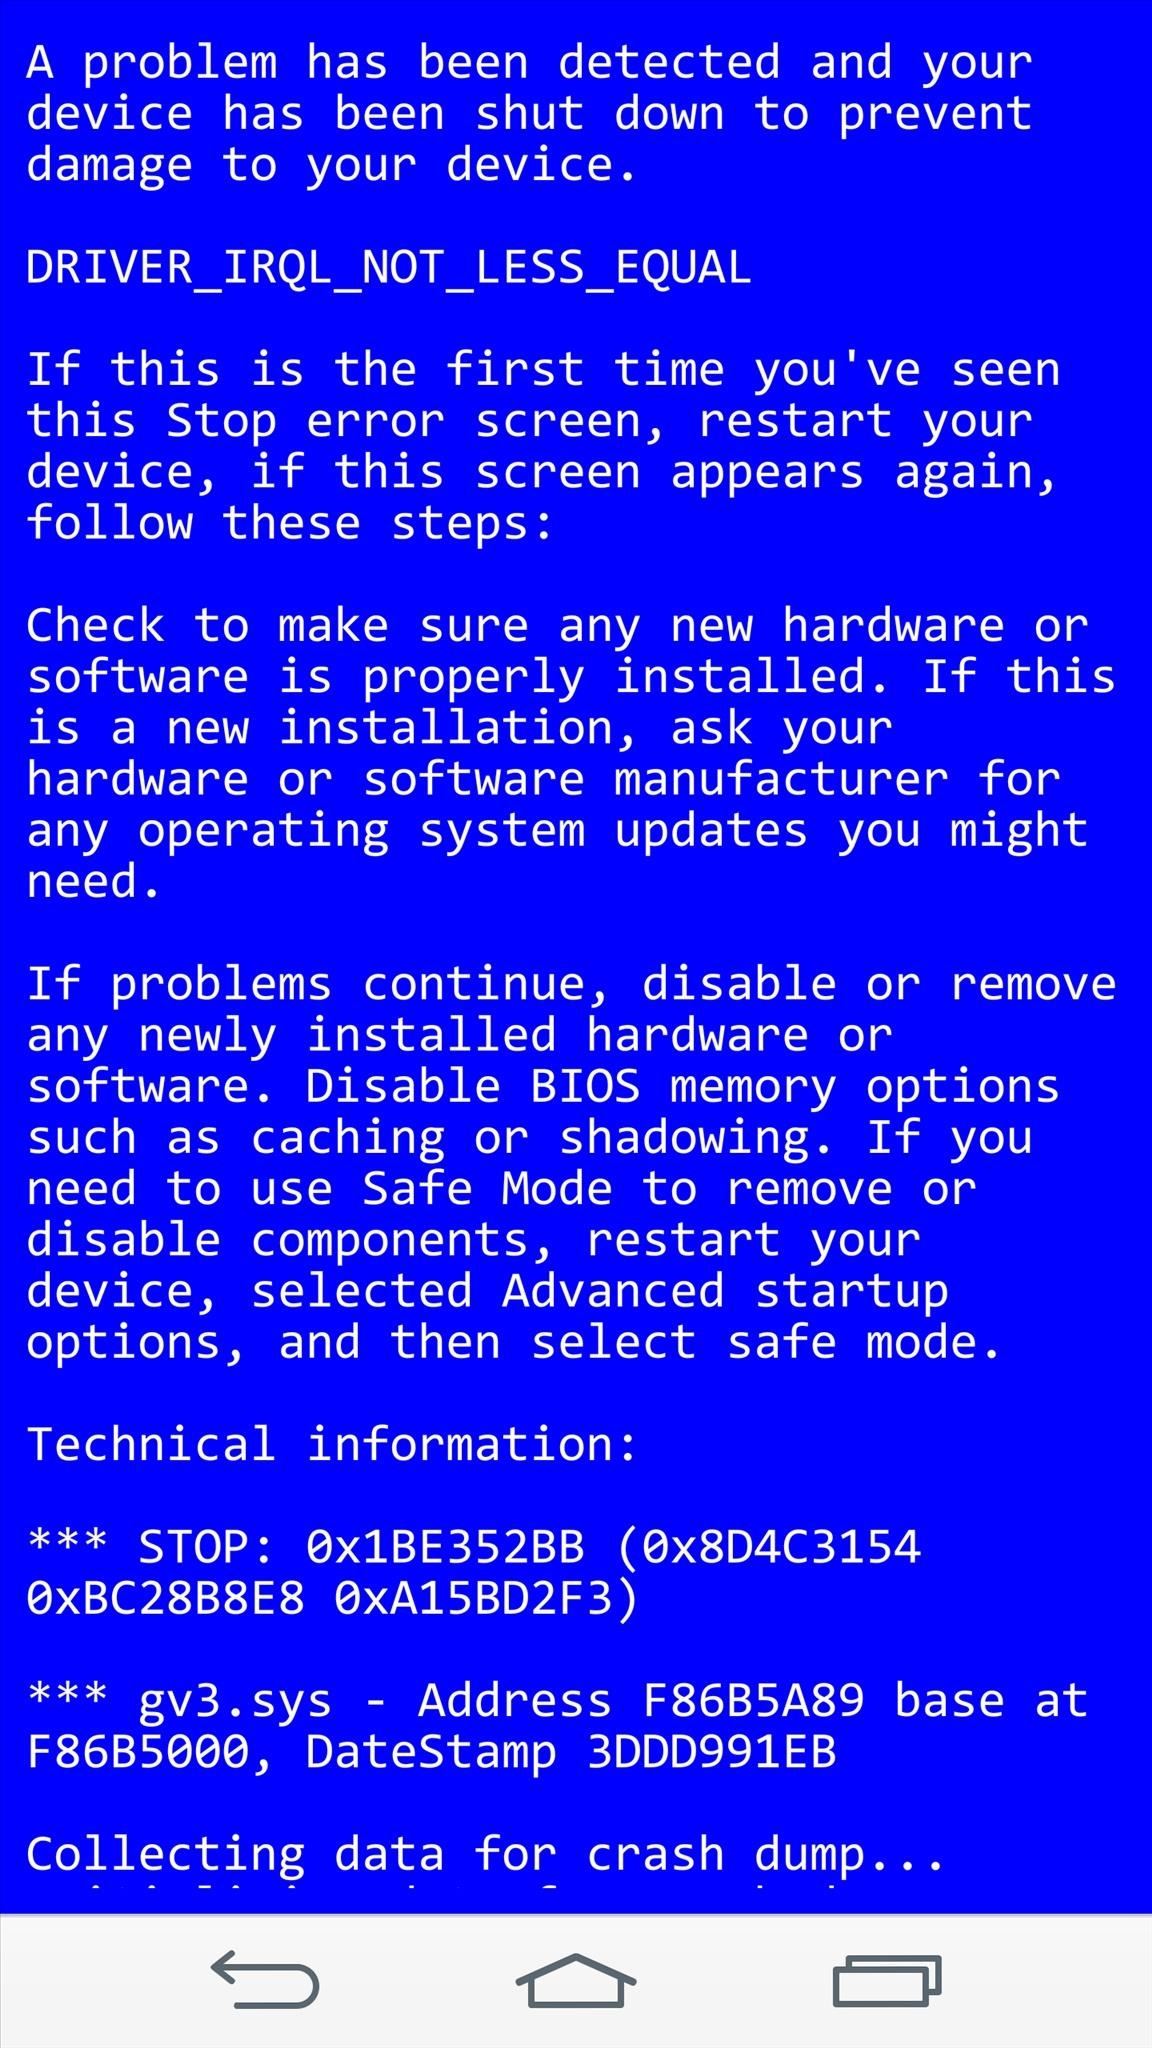 Blue Screen of Death: Prank Your Friend's Precious Android Phone with Fake Viruses